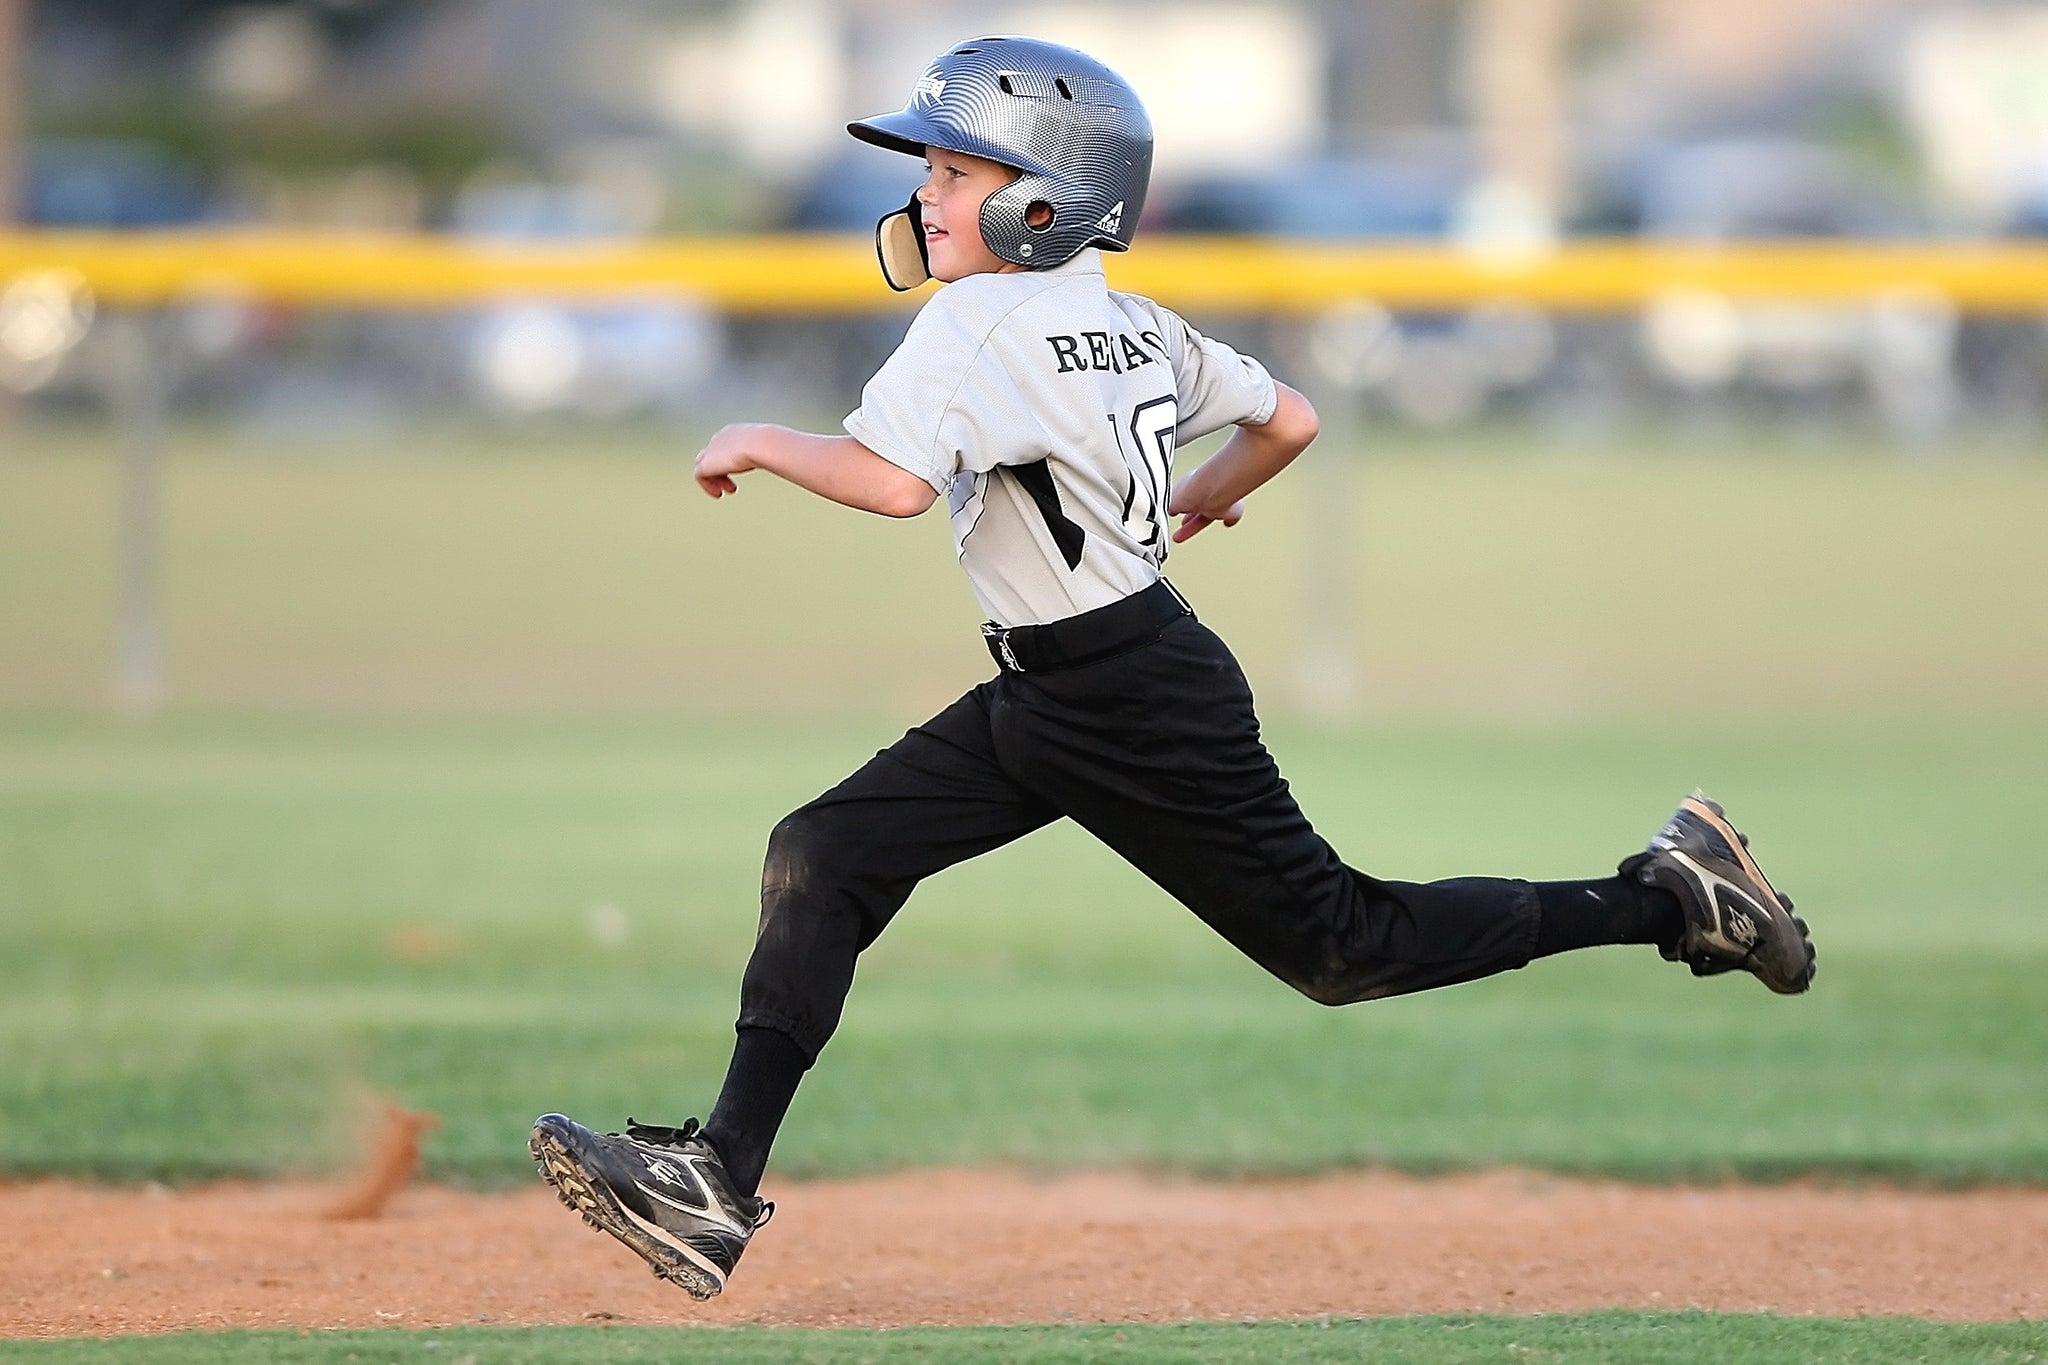 Young baserunner fueled by the best protein powder for kid athletes is running the bases